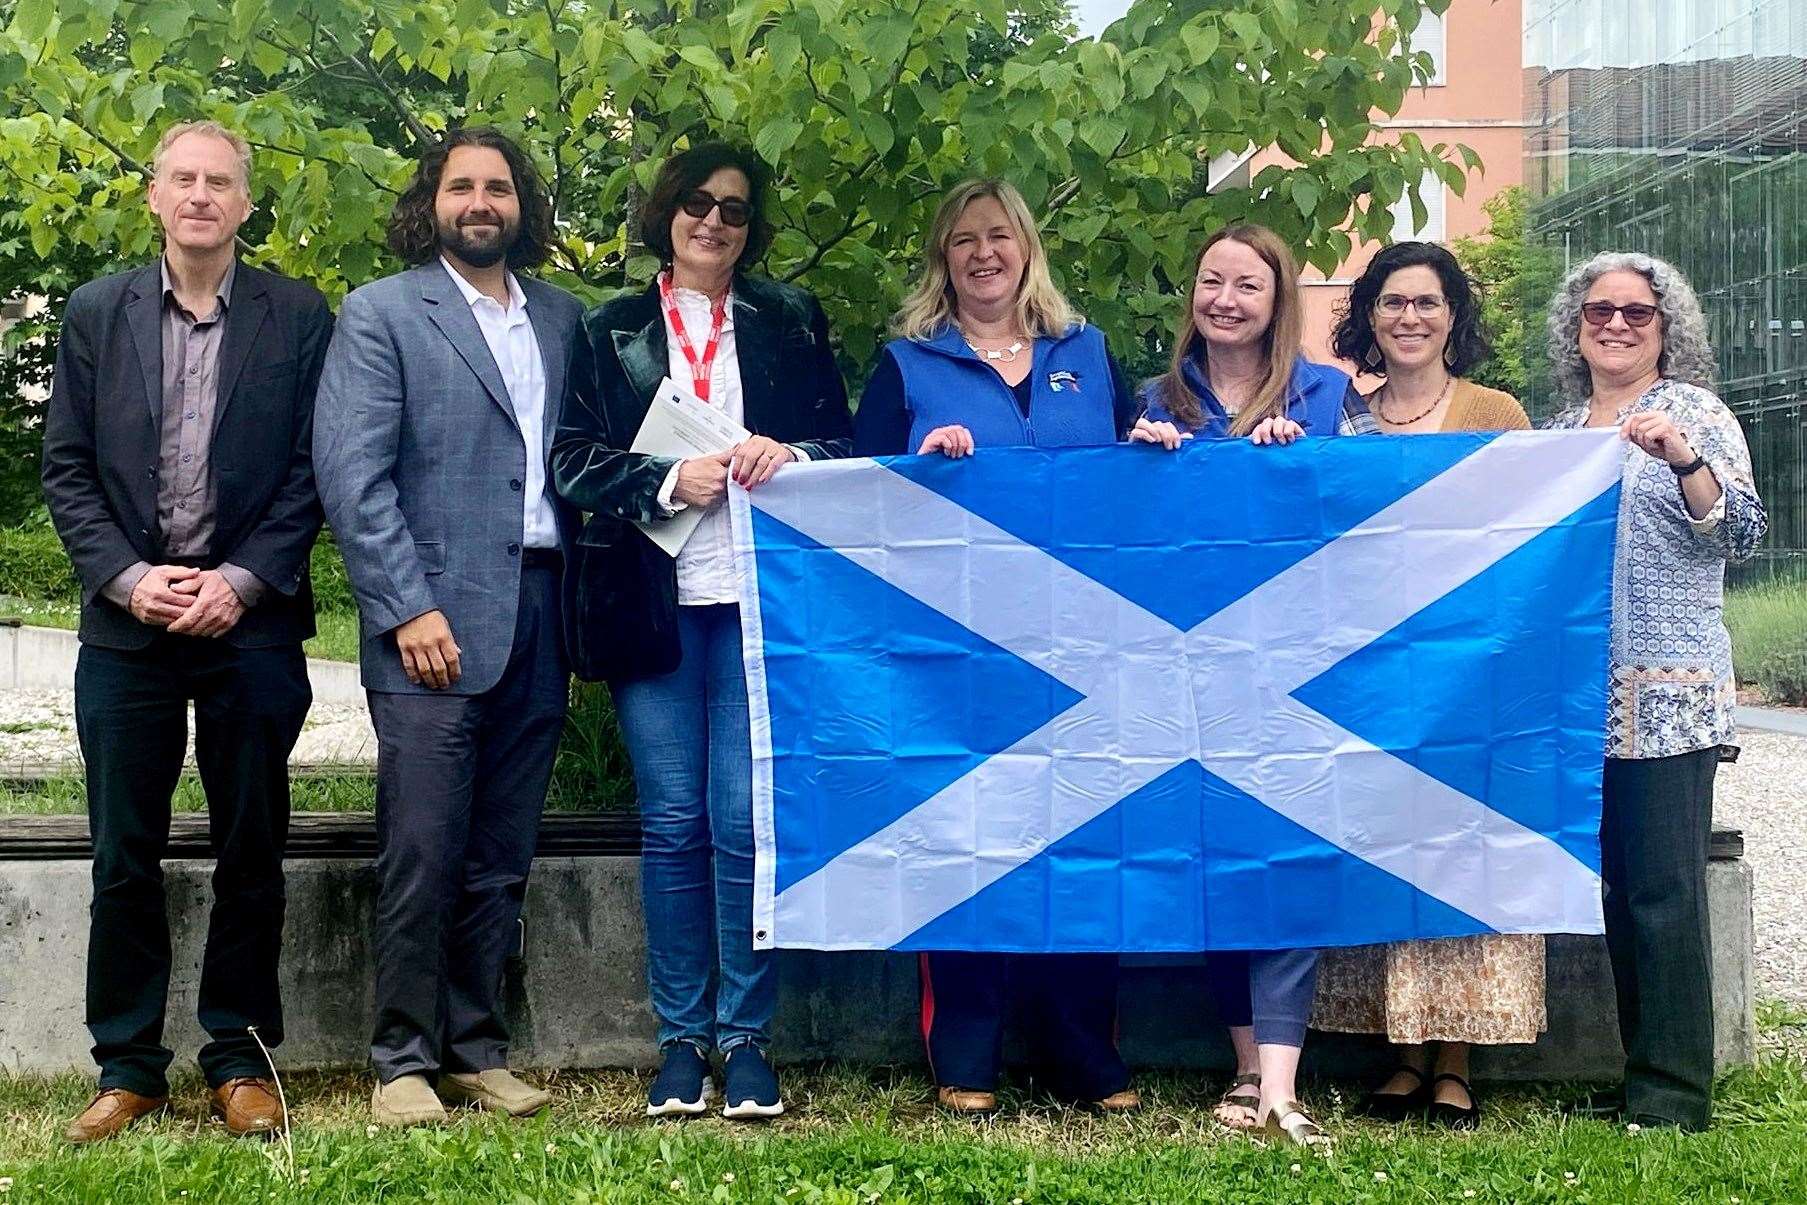 Caroline Millar, Scottish Agritourism Sector Lead and Laura Paterson, Scottish Agritourism Head of Stakeholder & Brand Engagement with international agritourism colleagues following the announcement of Scotland’s winning bid at the World Agritourism Conference in Bolzano, Italy.